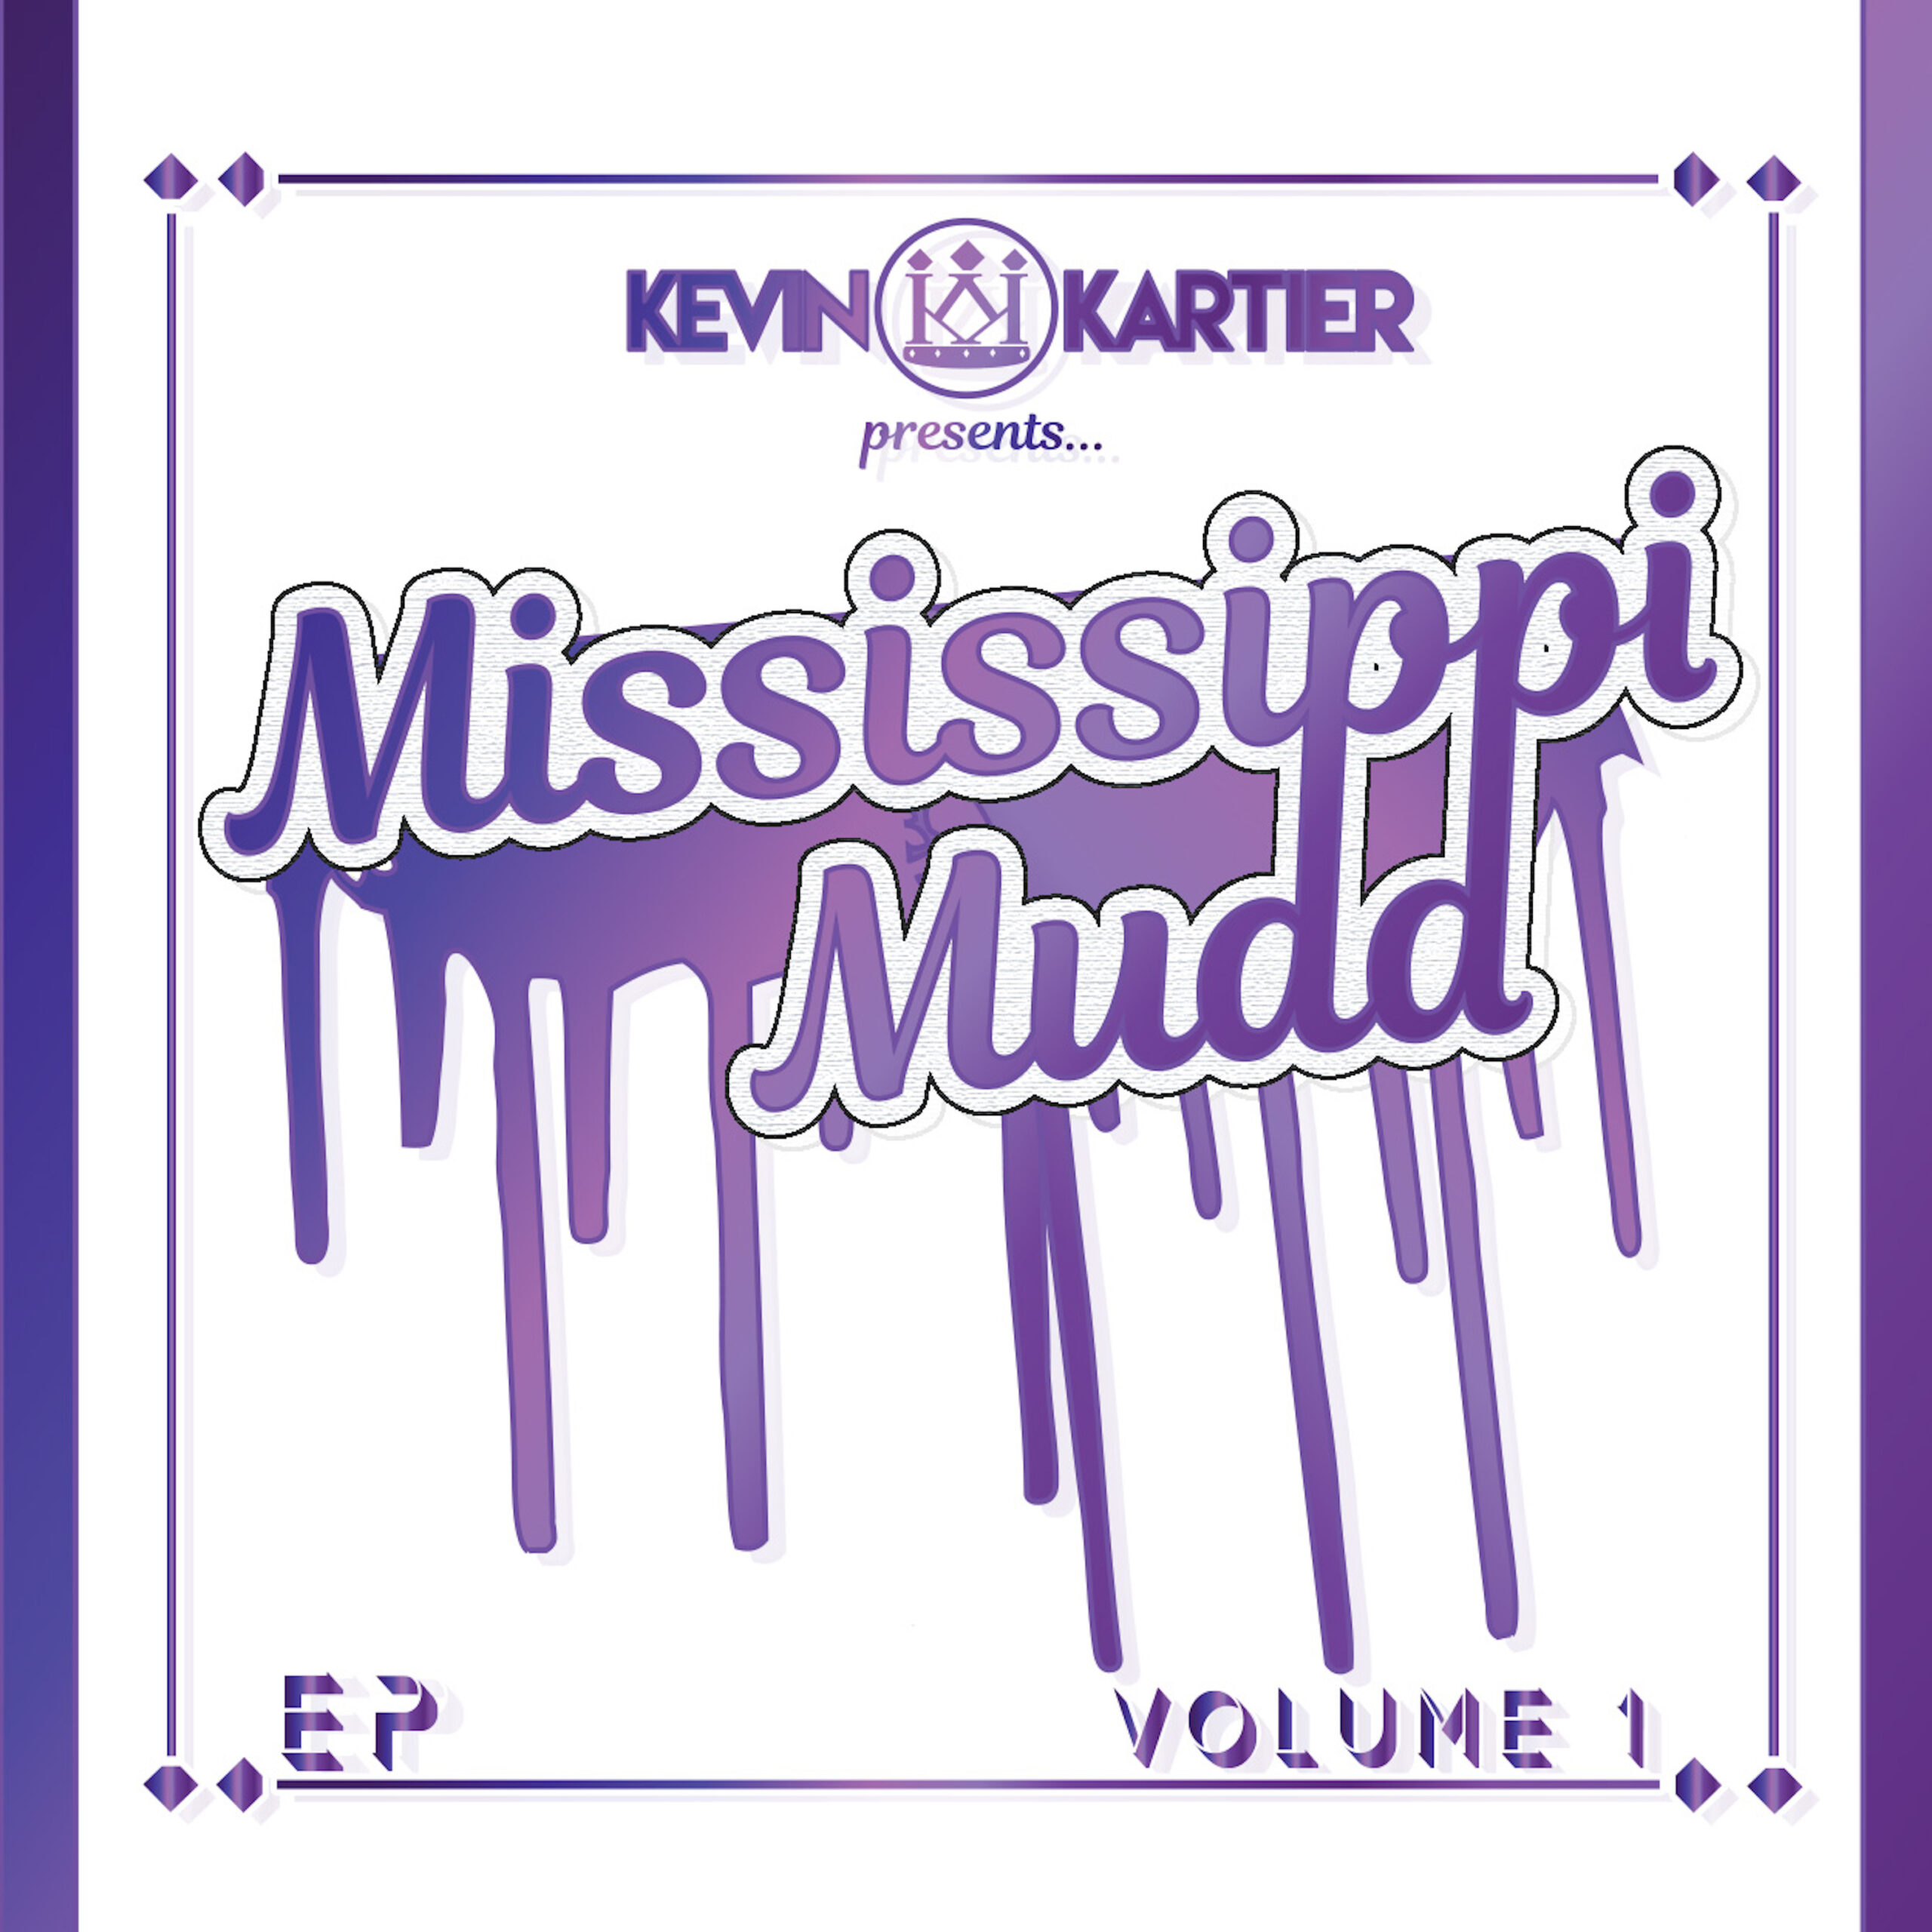 Kevin Kartier Drops New EP, “Mississippi Mudd”